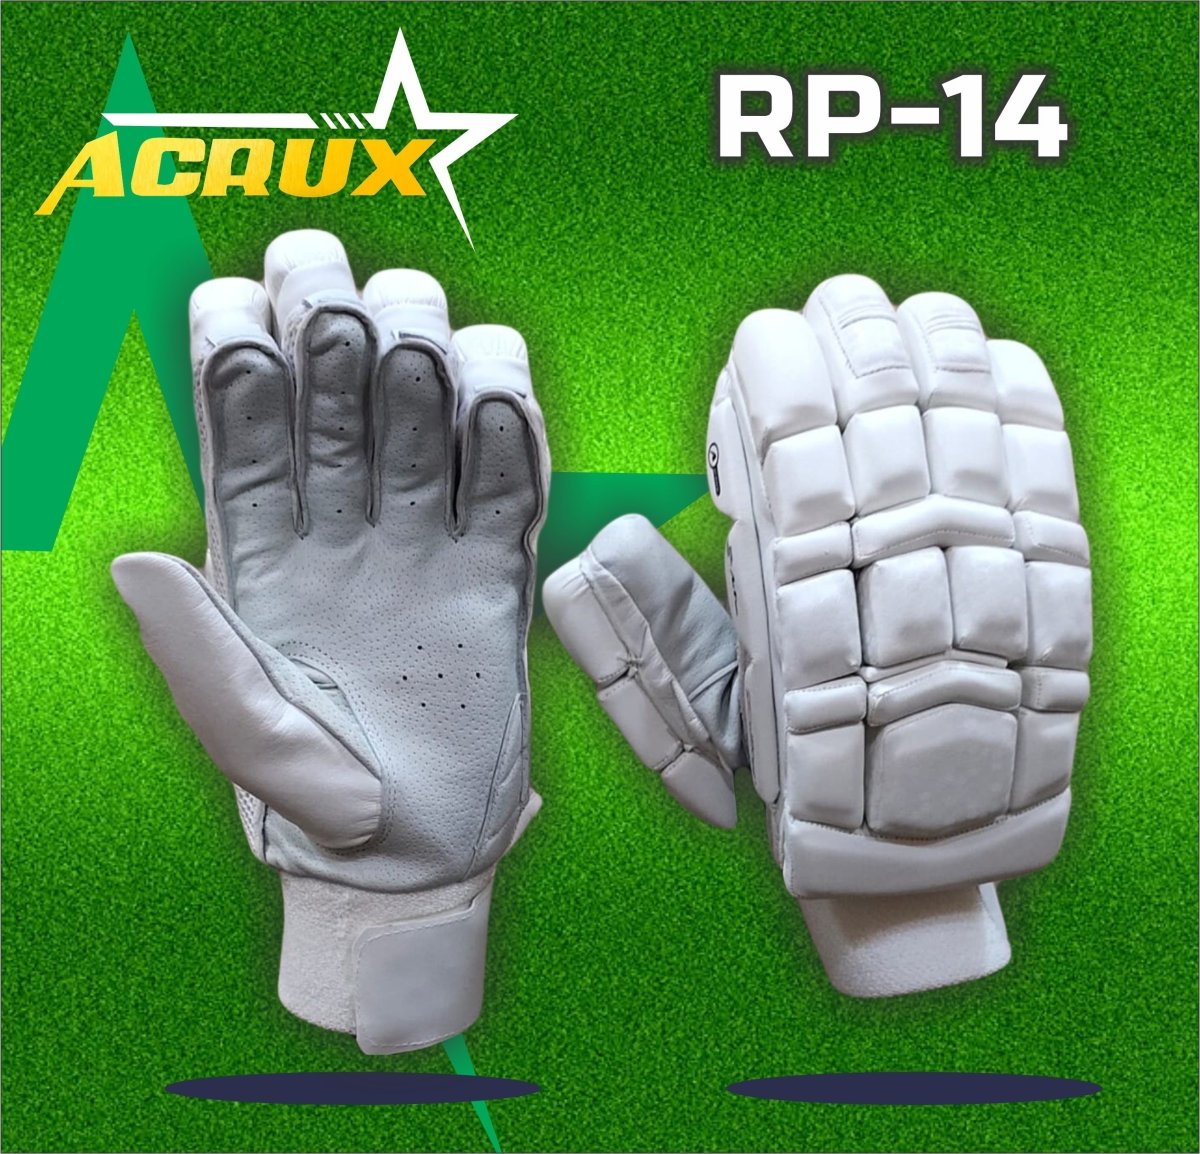 English Willow Bat With Massive 45mm++ Edges + Cricket Batting Gloves RP-14 Combo - Acrux Sports